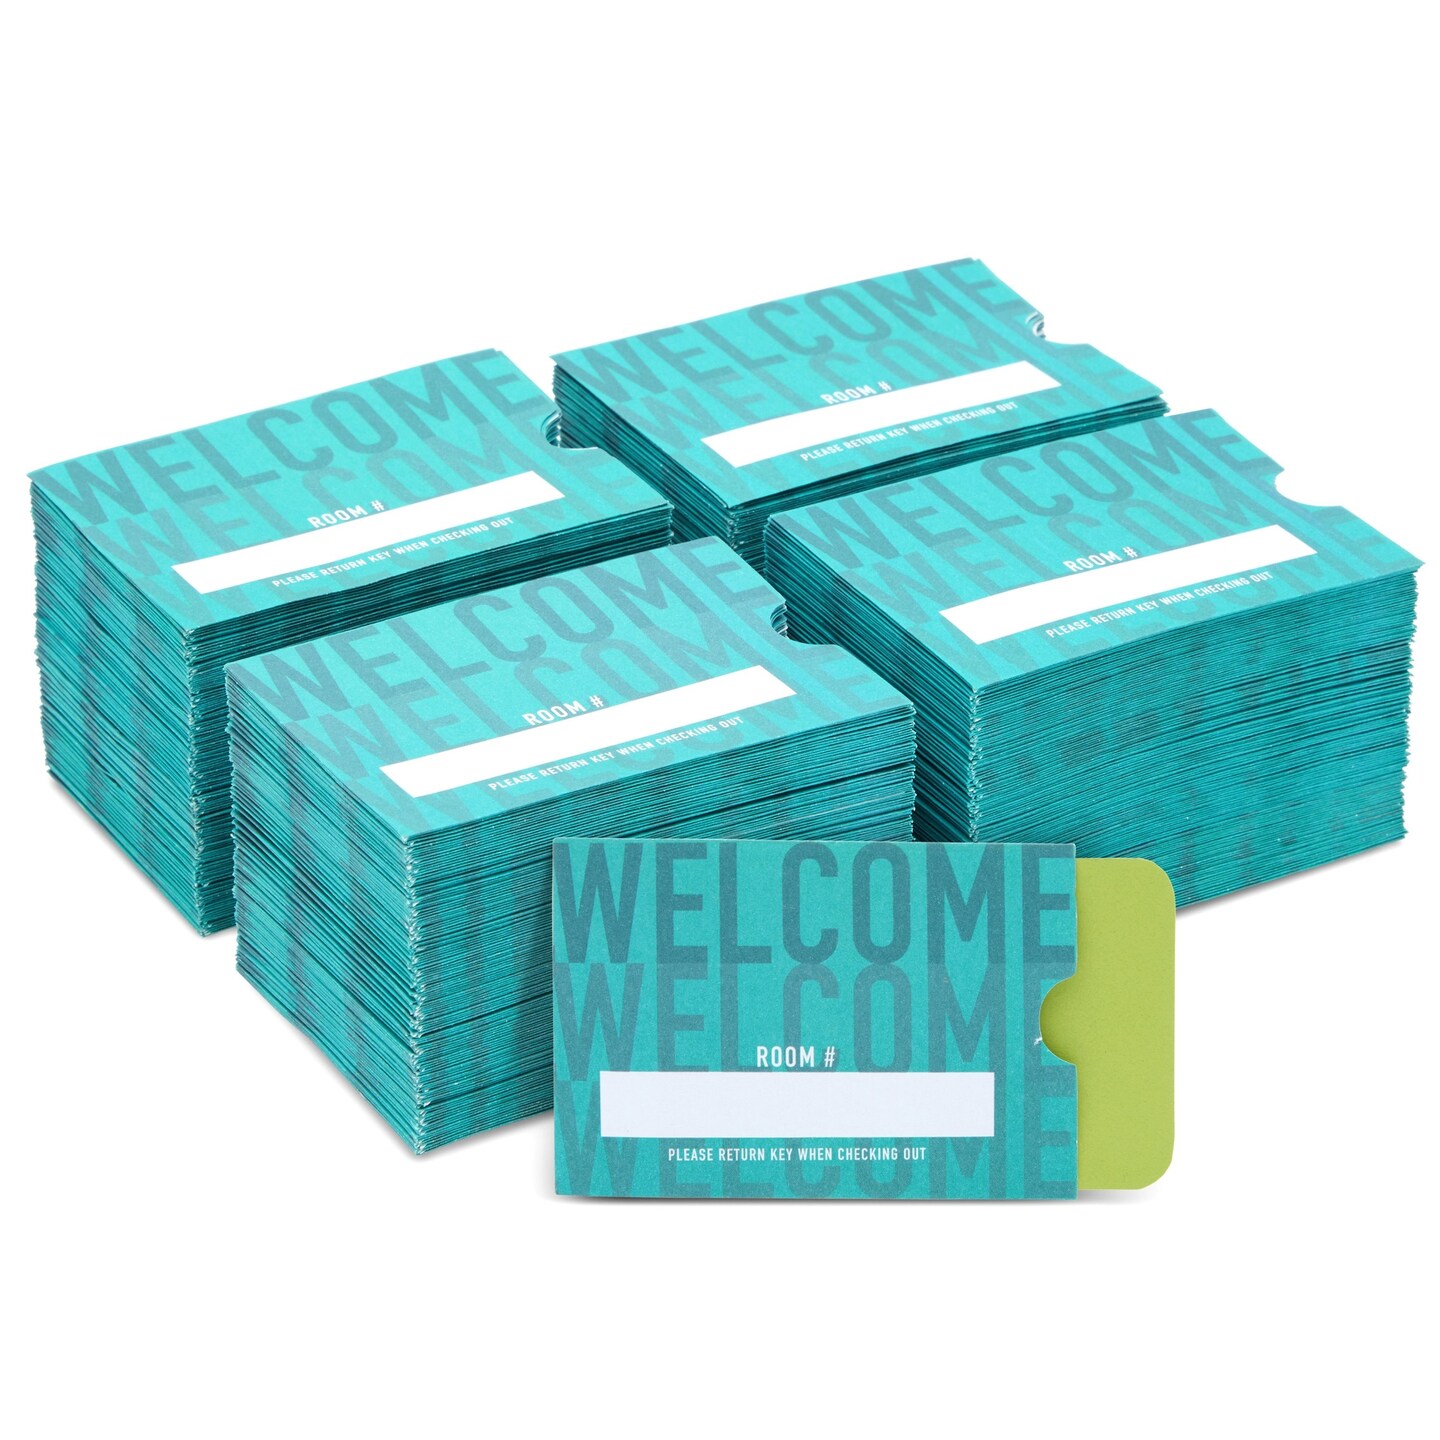 Keycard Envelope Sleeve to Welcome Guests (Teal, 2.5 x 3.38 in, 500 Pack)